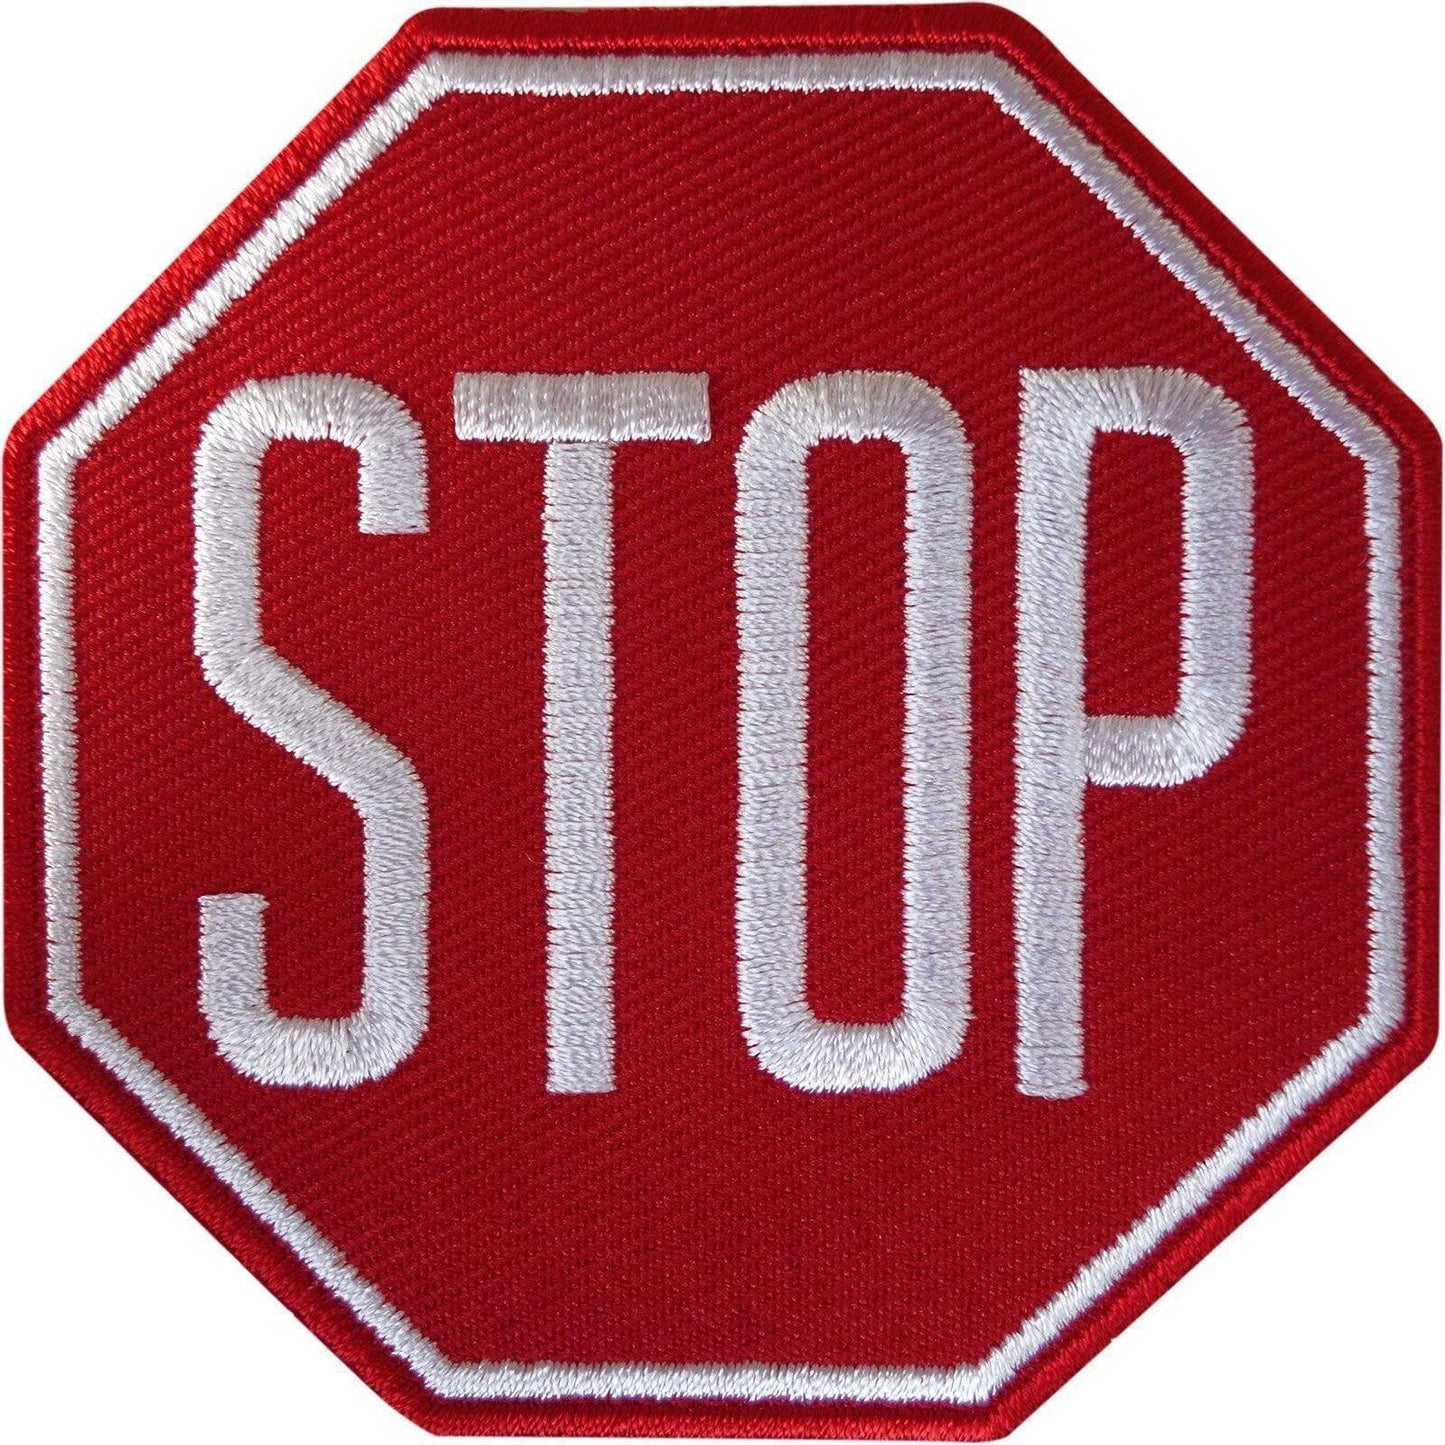 Stop Sign Patch Iron On Sew On Road Safety Embroidered Badge Embroidery Applique